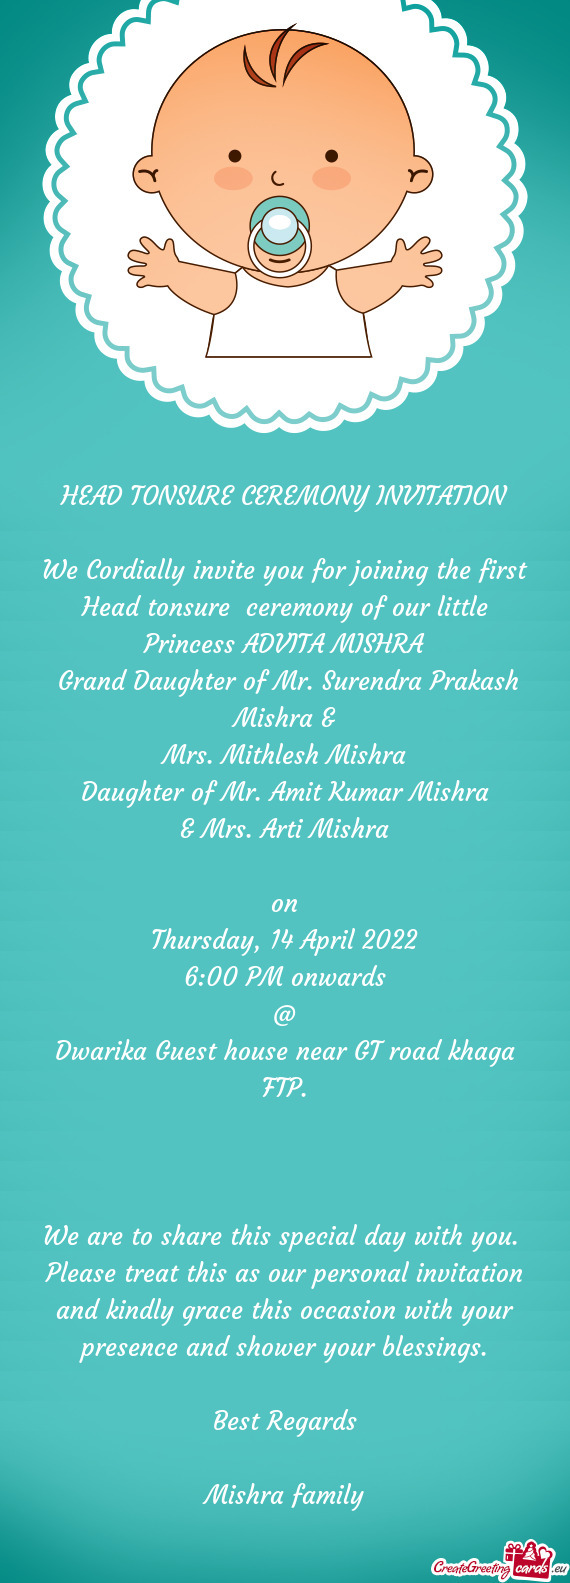 We Cordially invite you for joining the first Head tonsure ceremony of our little Princess ADVITA M